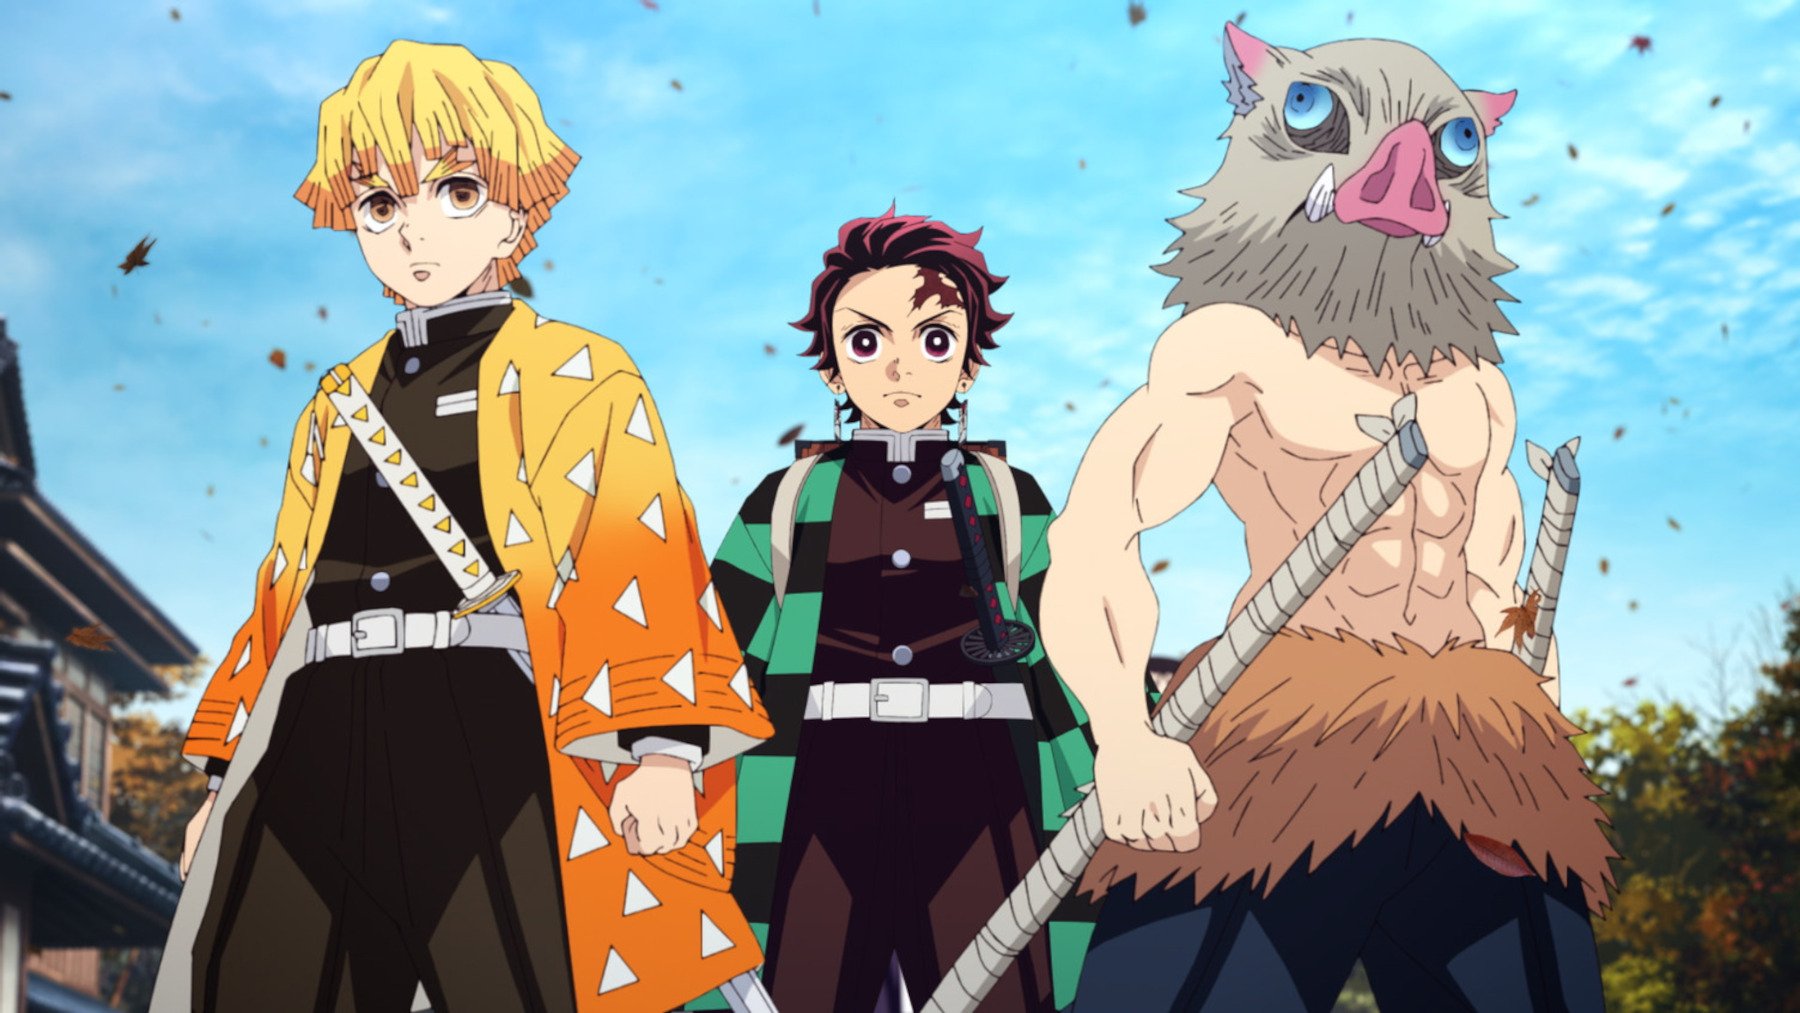 Demon Slayer' Season 3 Confirmed: Everything We Know About The